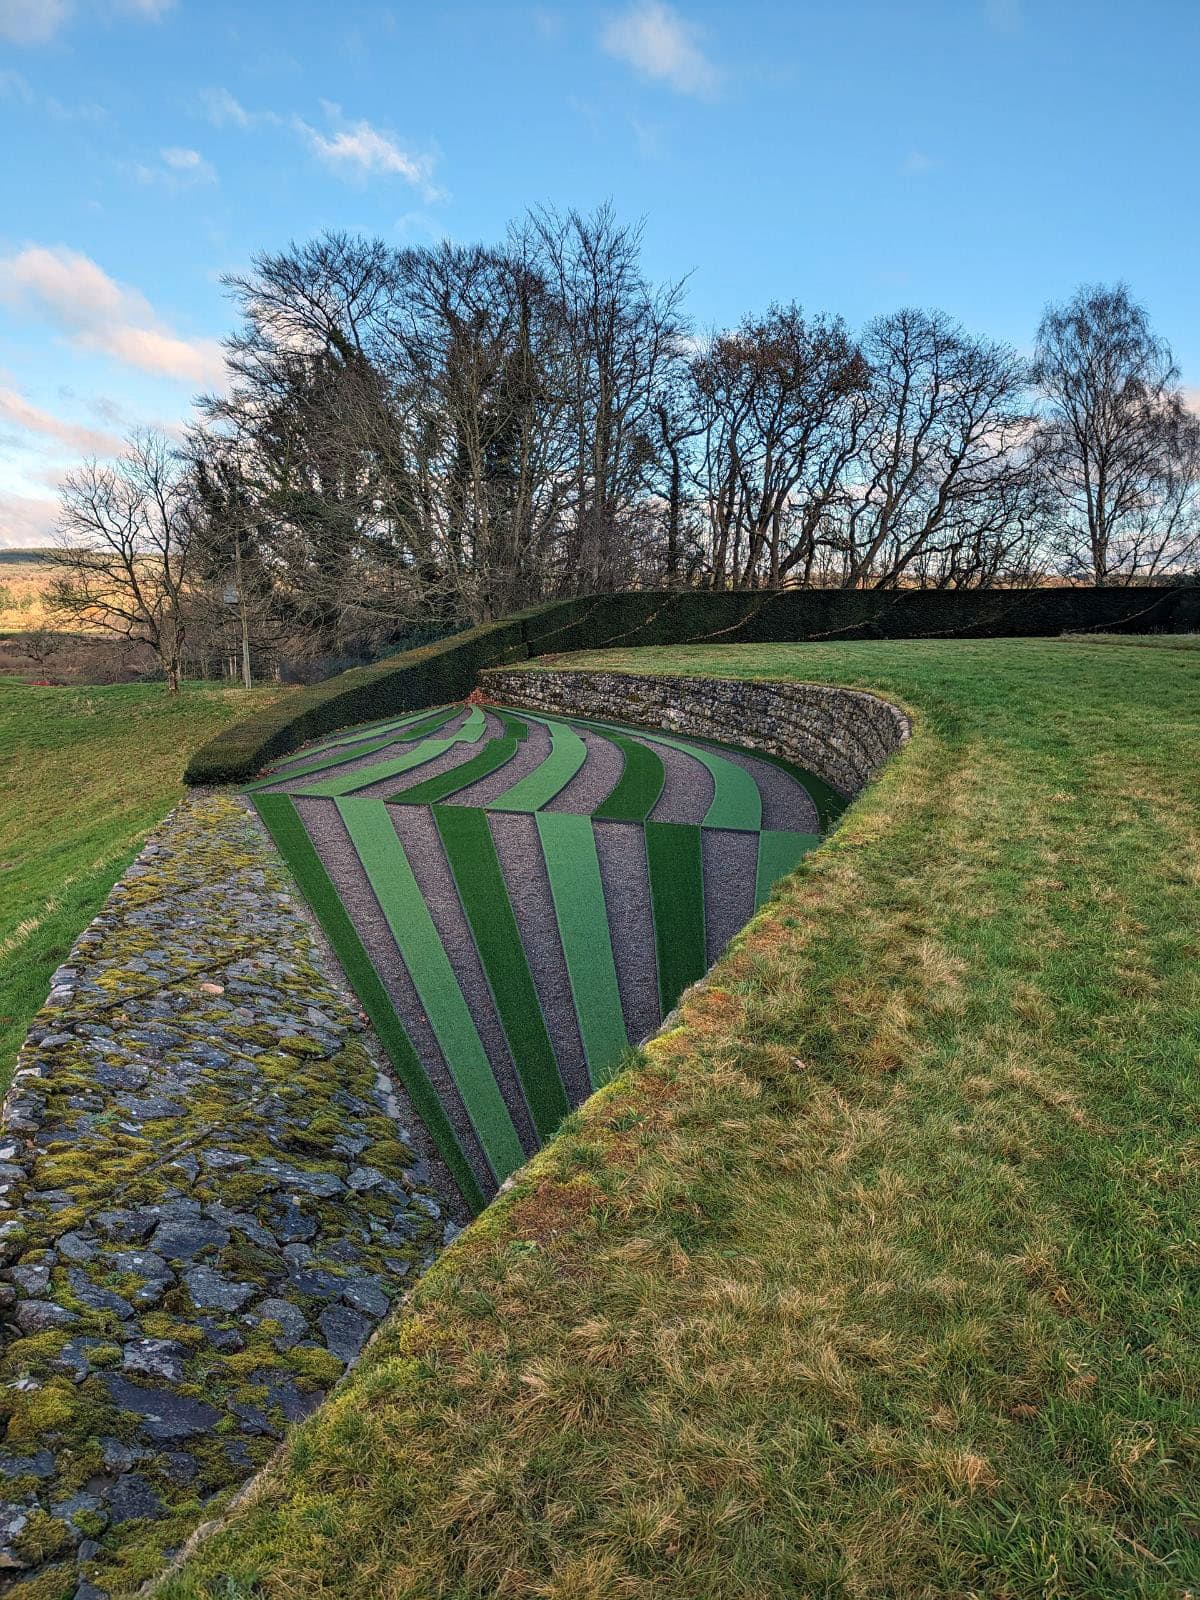 A Perfect Day at The Garden of Cosmic Speculation